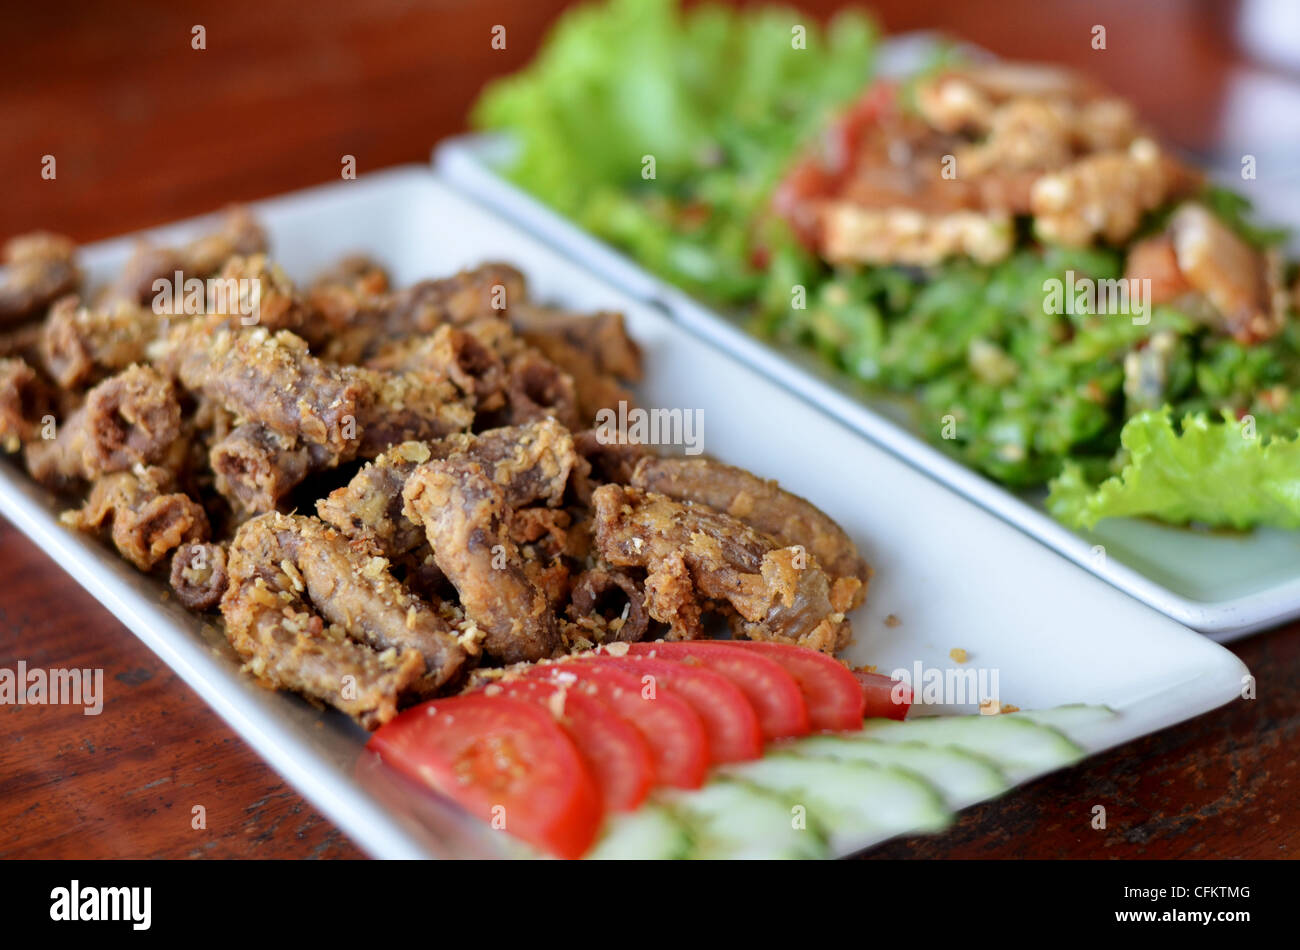 deep fried Pork's colon with garlic served with fresh vegetable Stock Photo